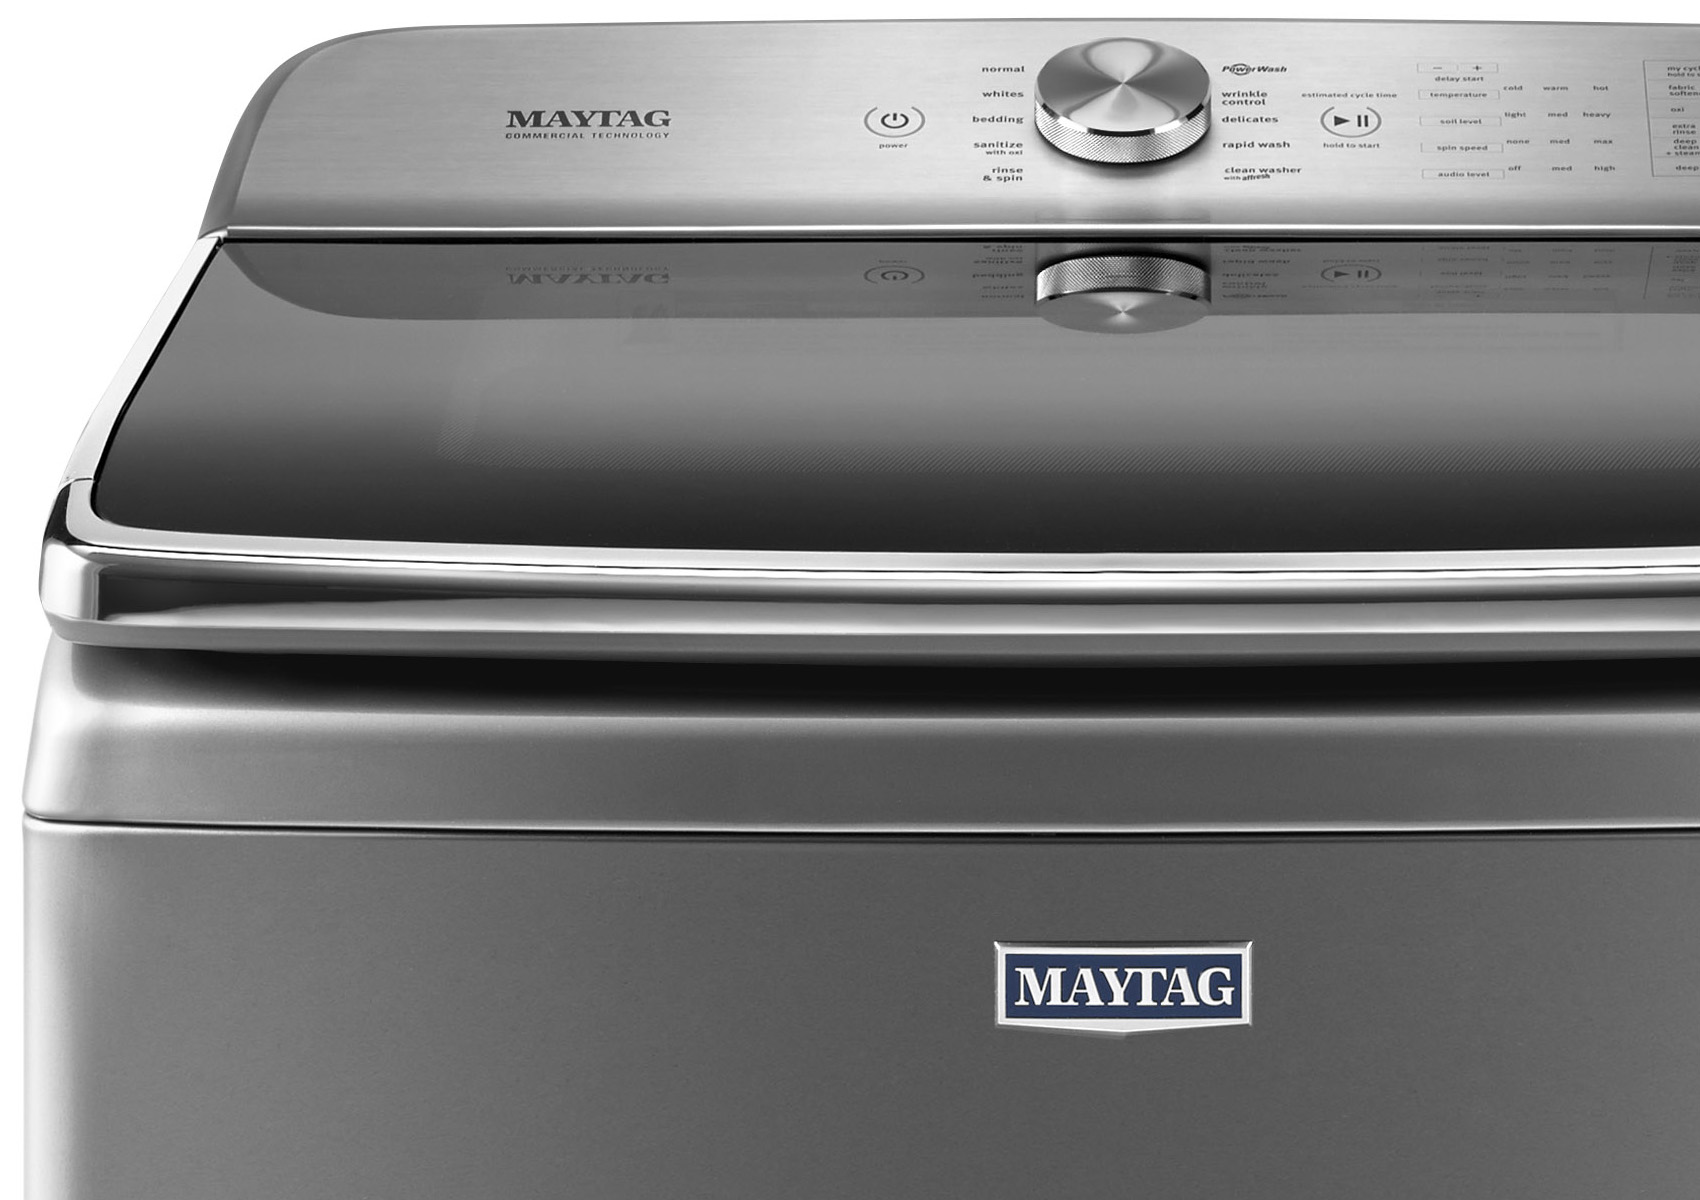 how to reset Maytag washer banner 3.0